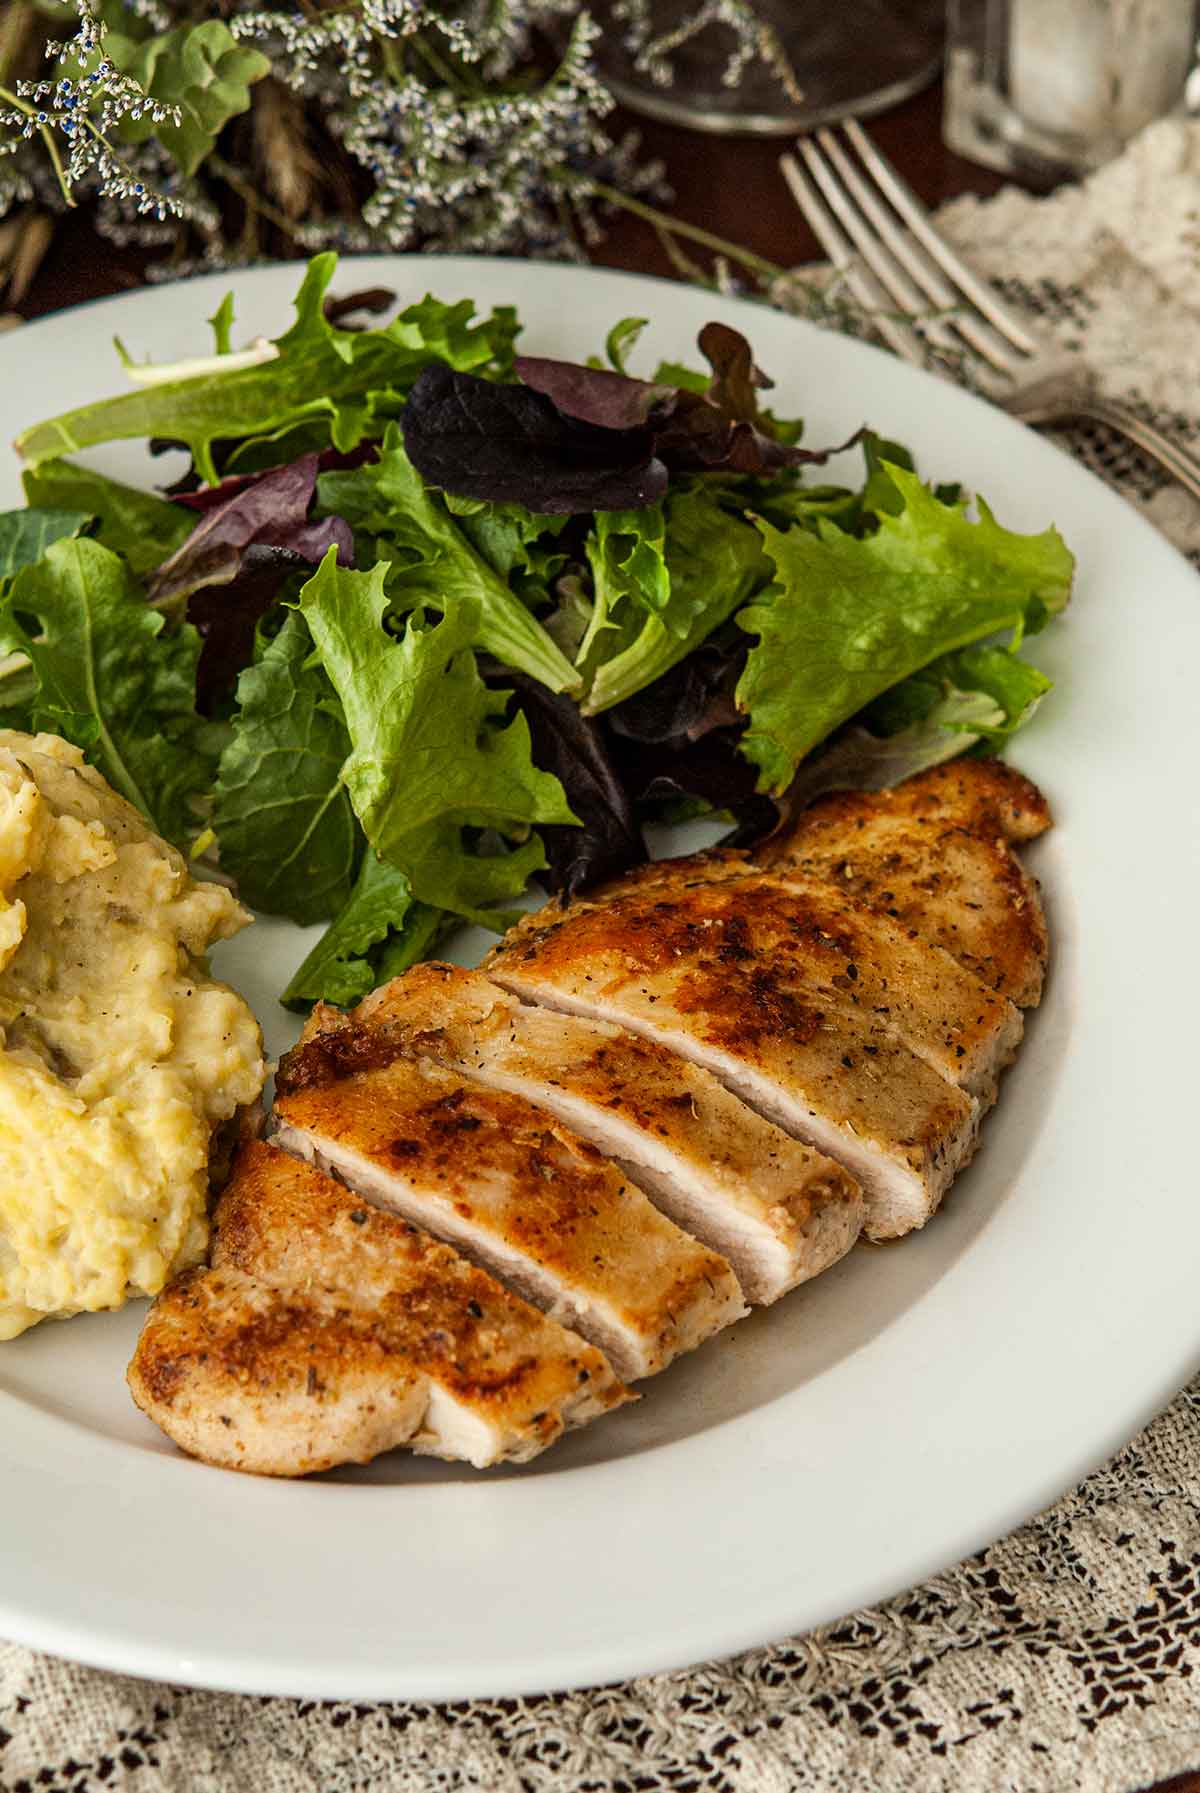 A sliced piece of chicken with Herbs de Provence on a plate with salad and potatoes.